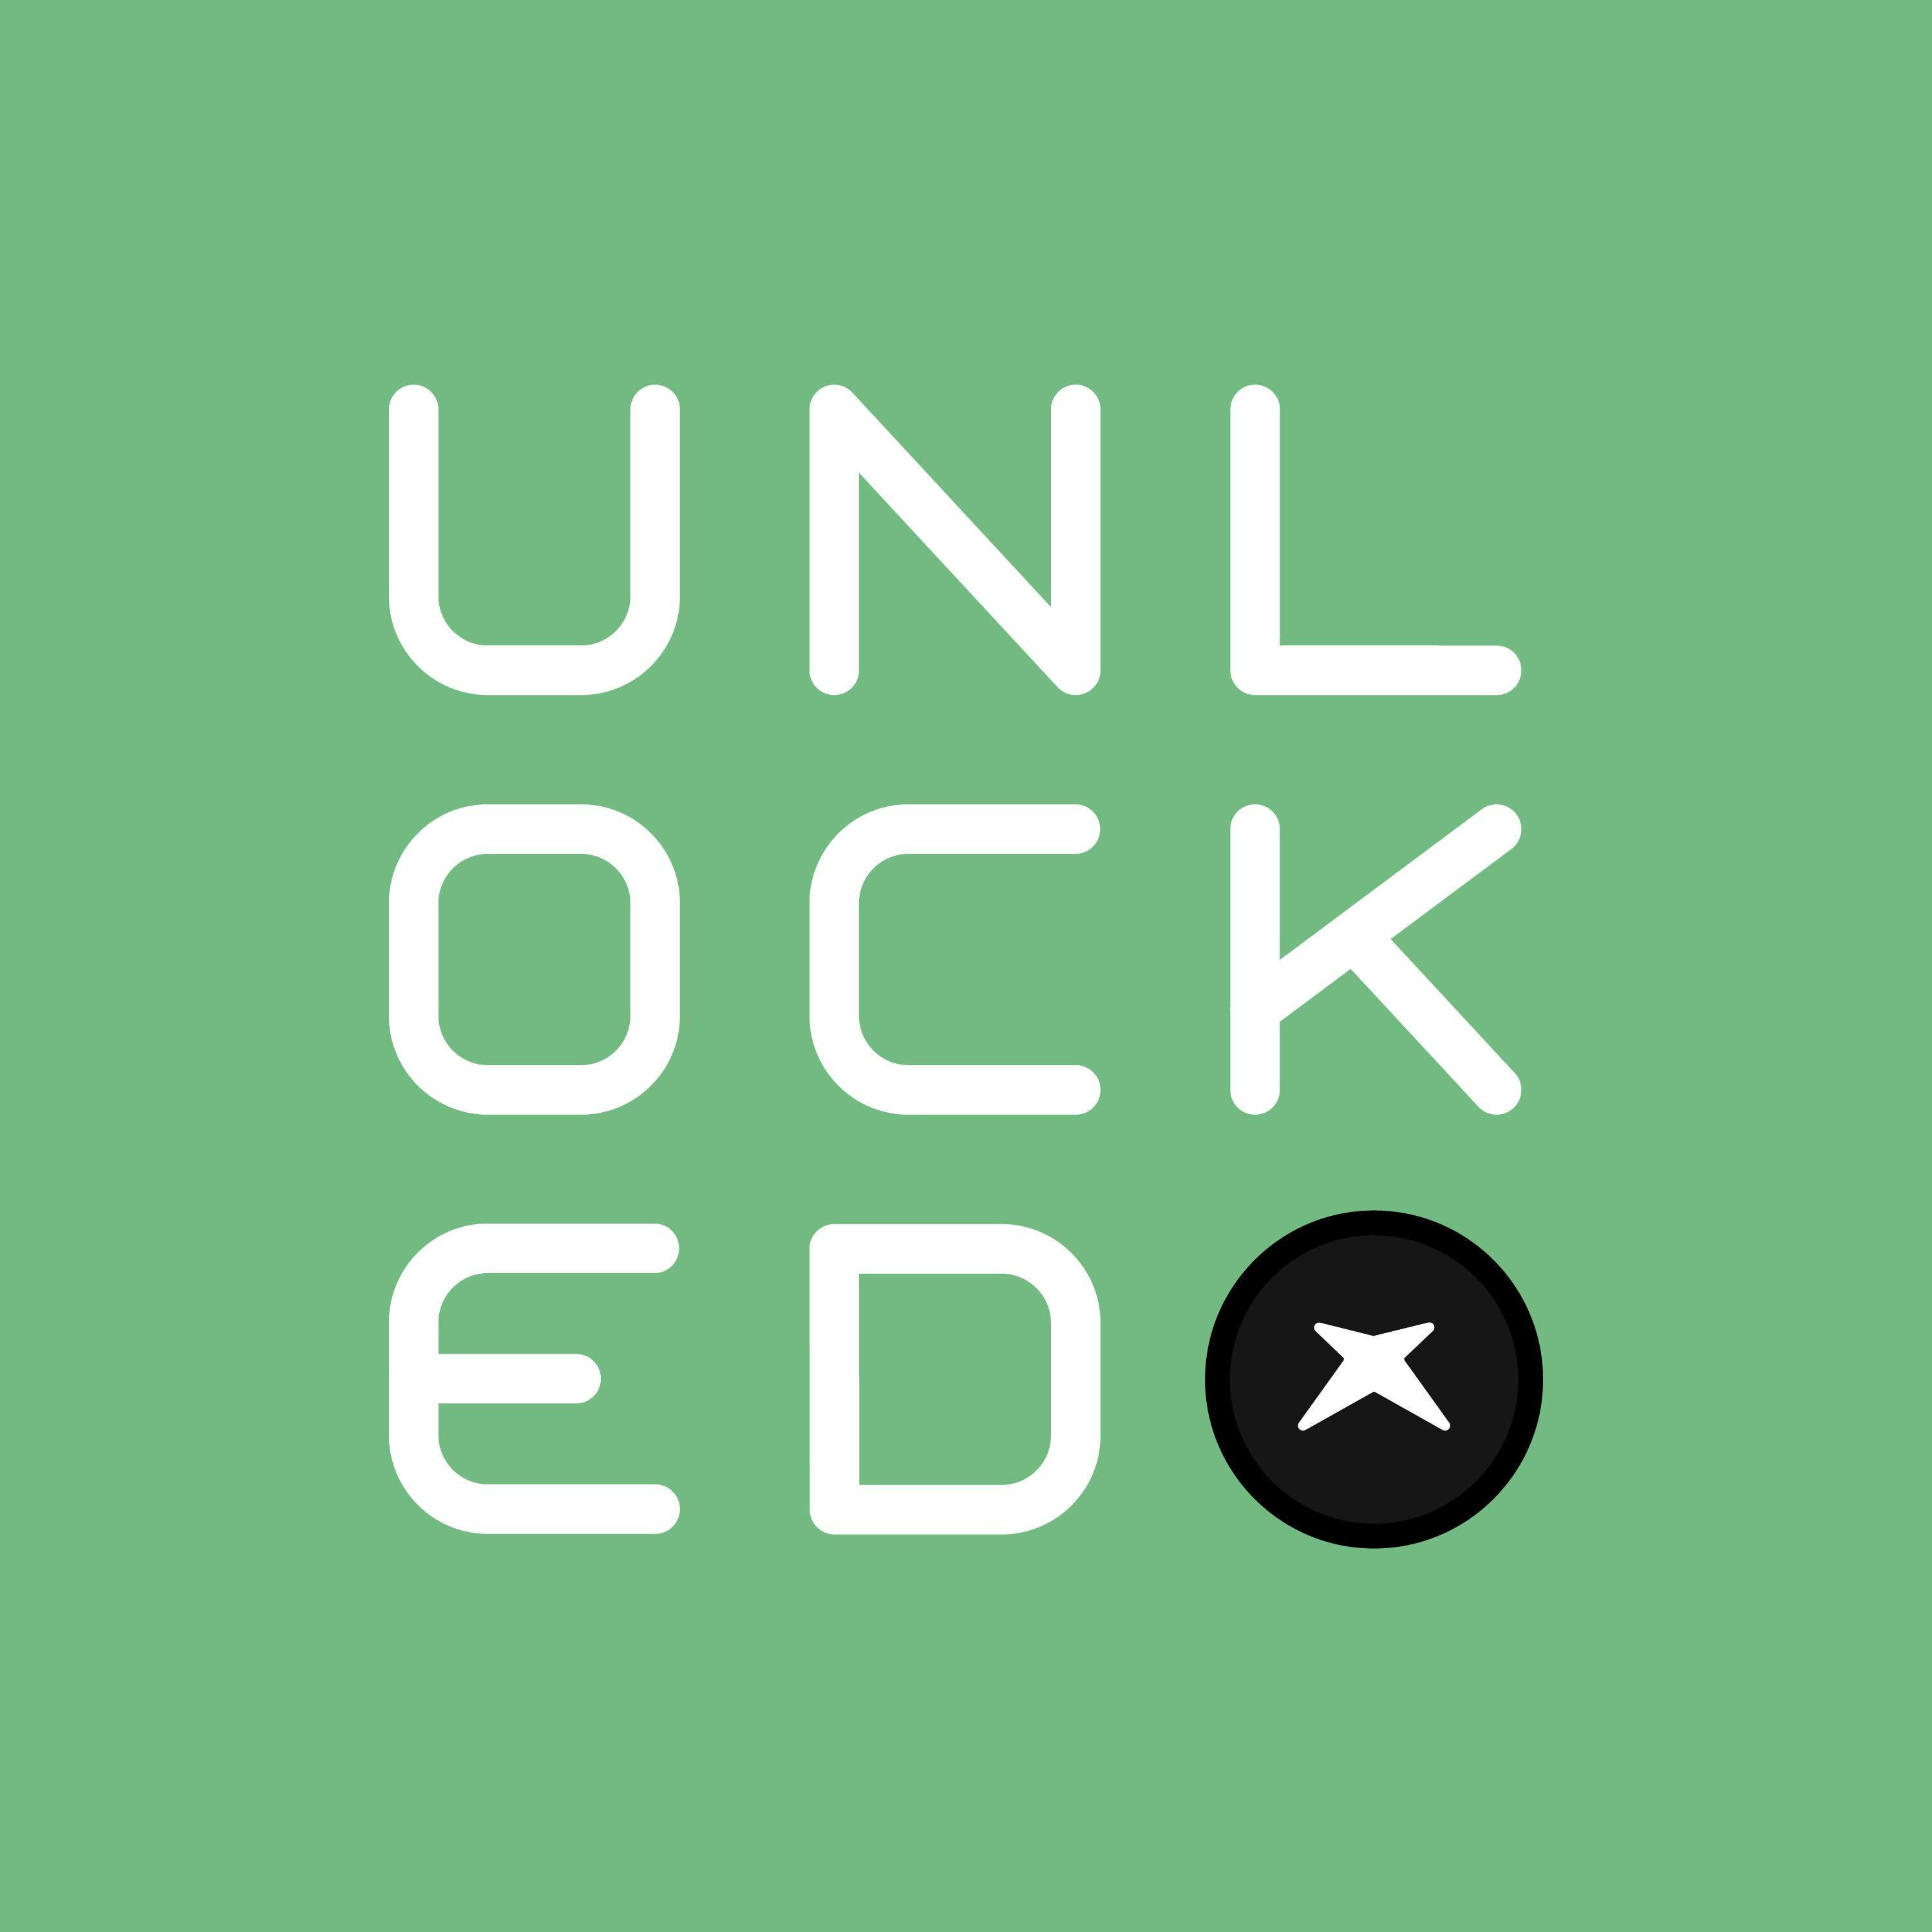 Podcast Unlocked Episode 236: Is Fable Dead?